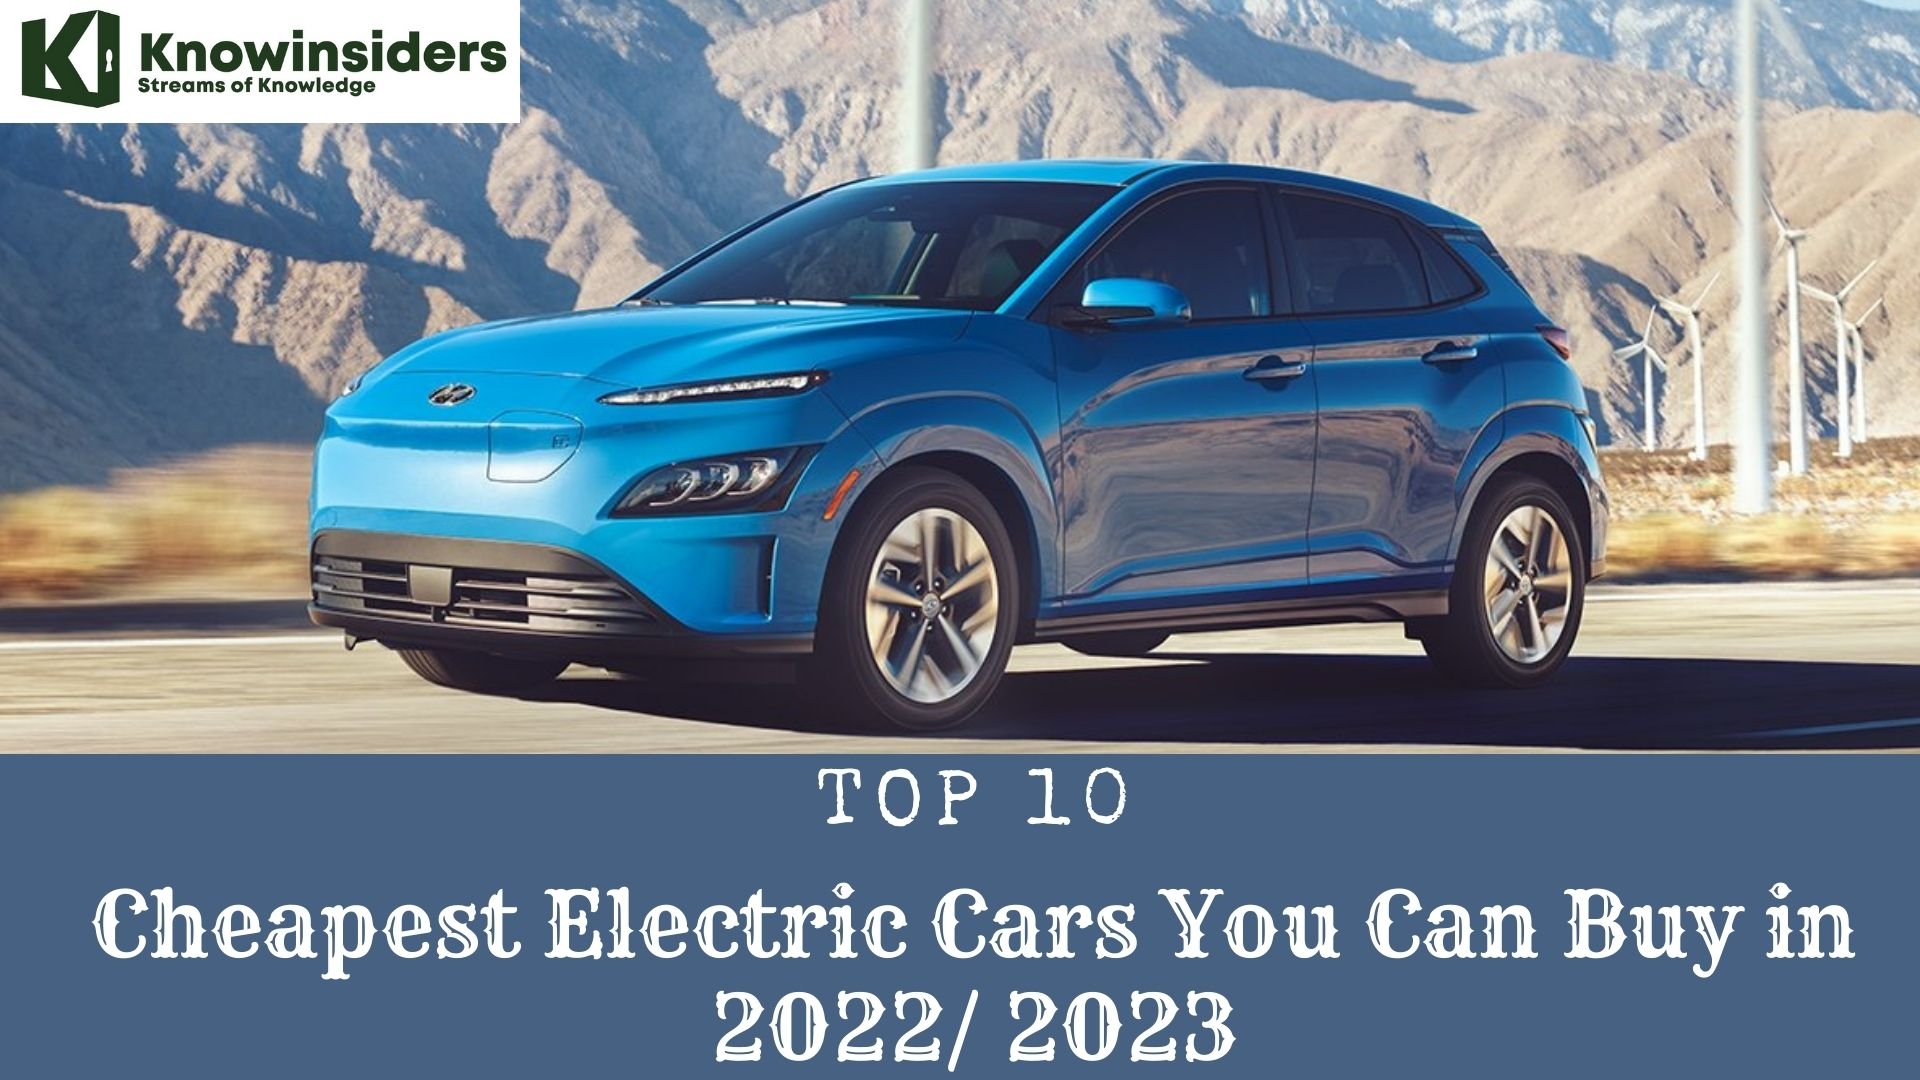 Top 10 Cheapest Electric Cars You Can Buy in 2022/ 2023